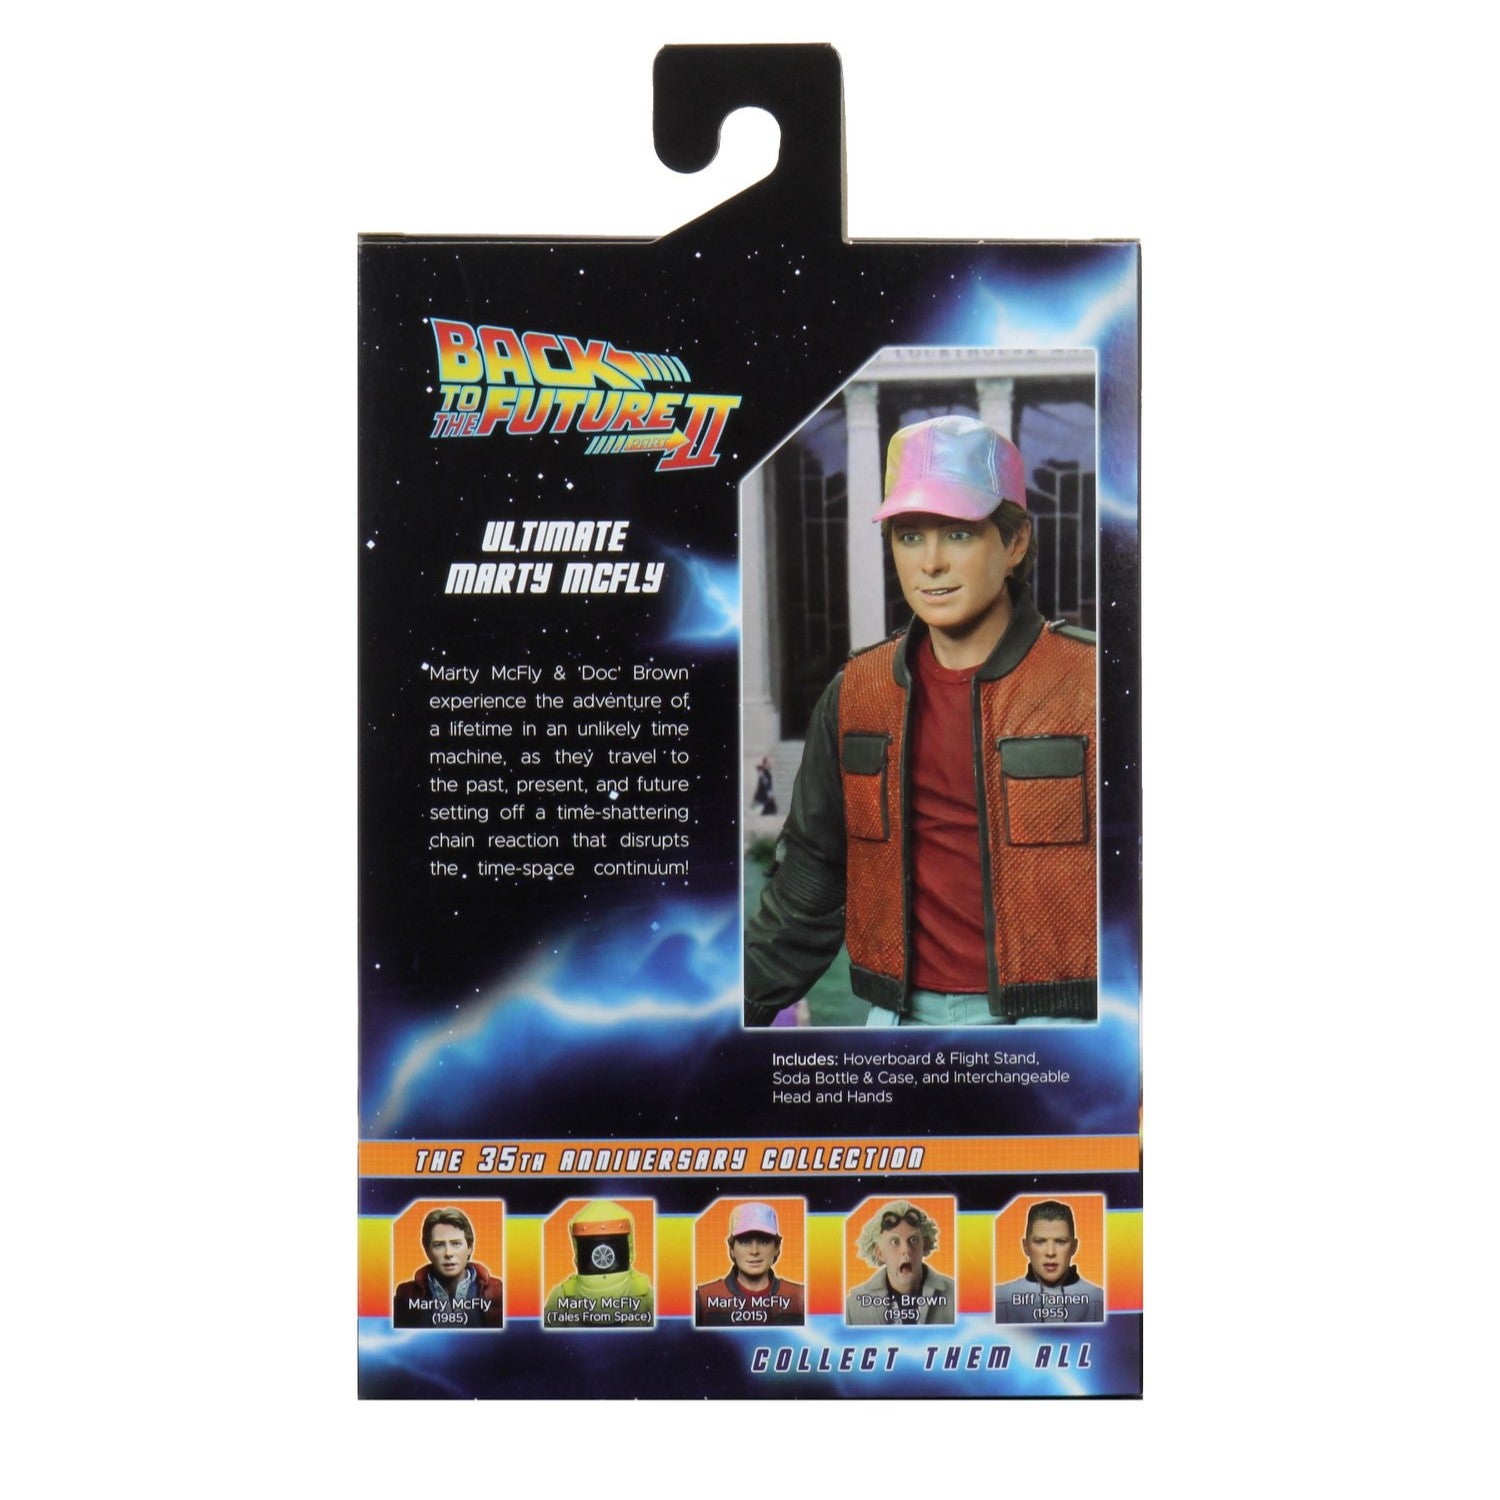 Back to the Future 2 Ultimate Marty McFly 7" Figure - Neca